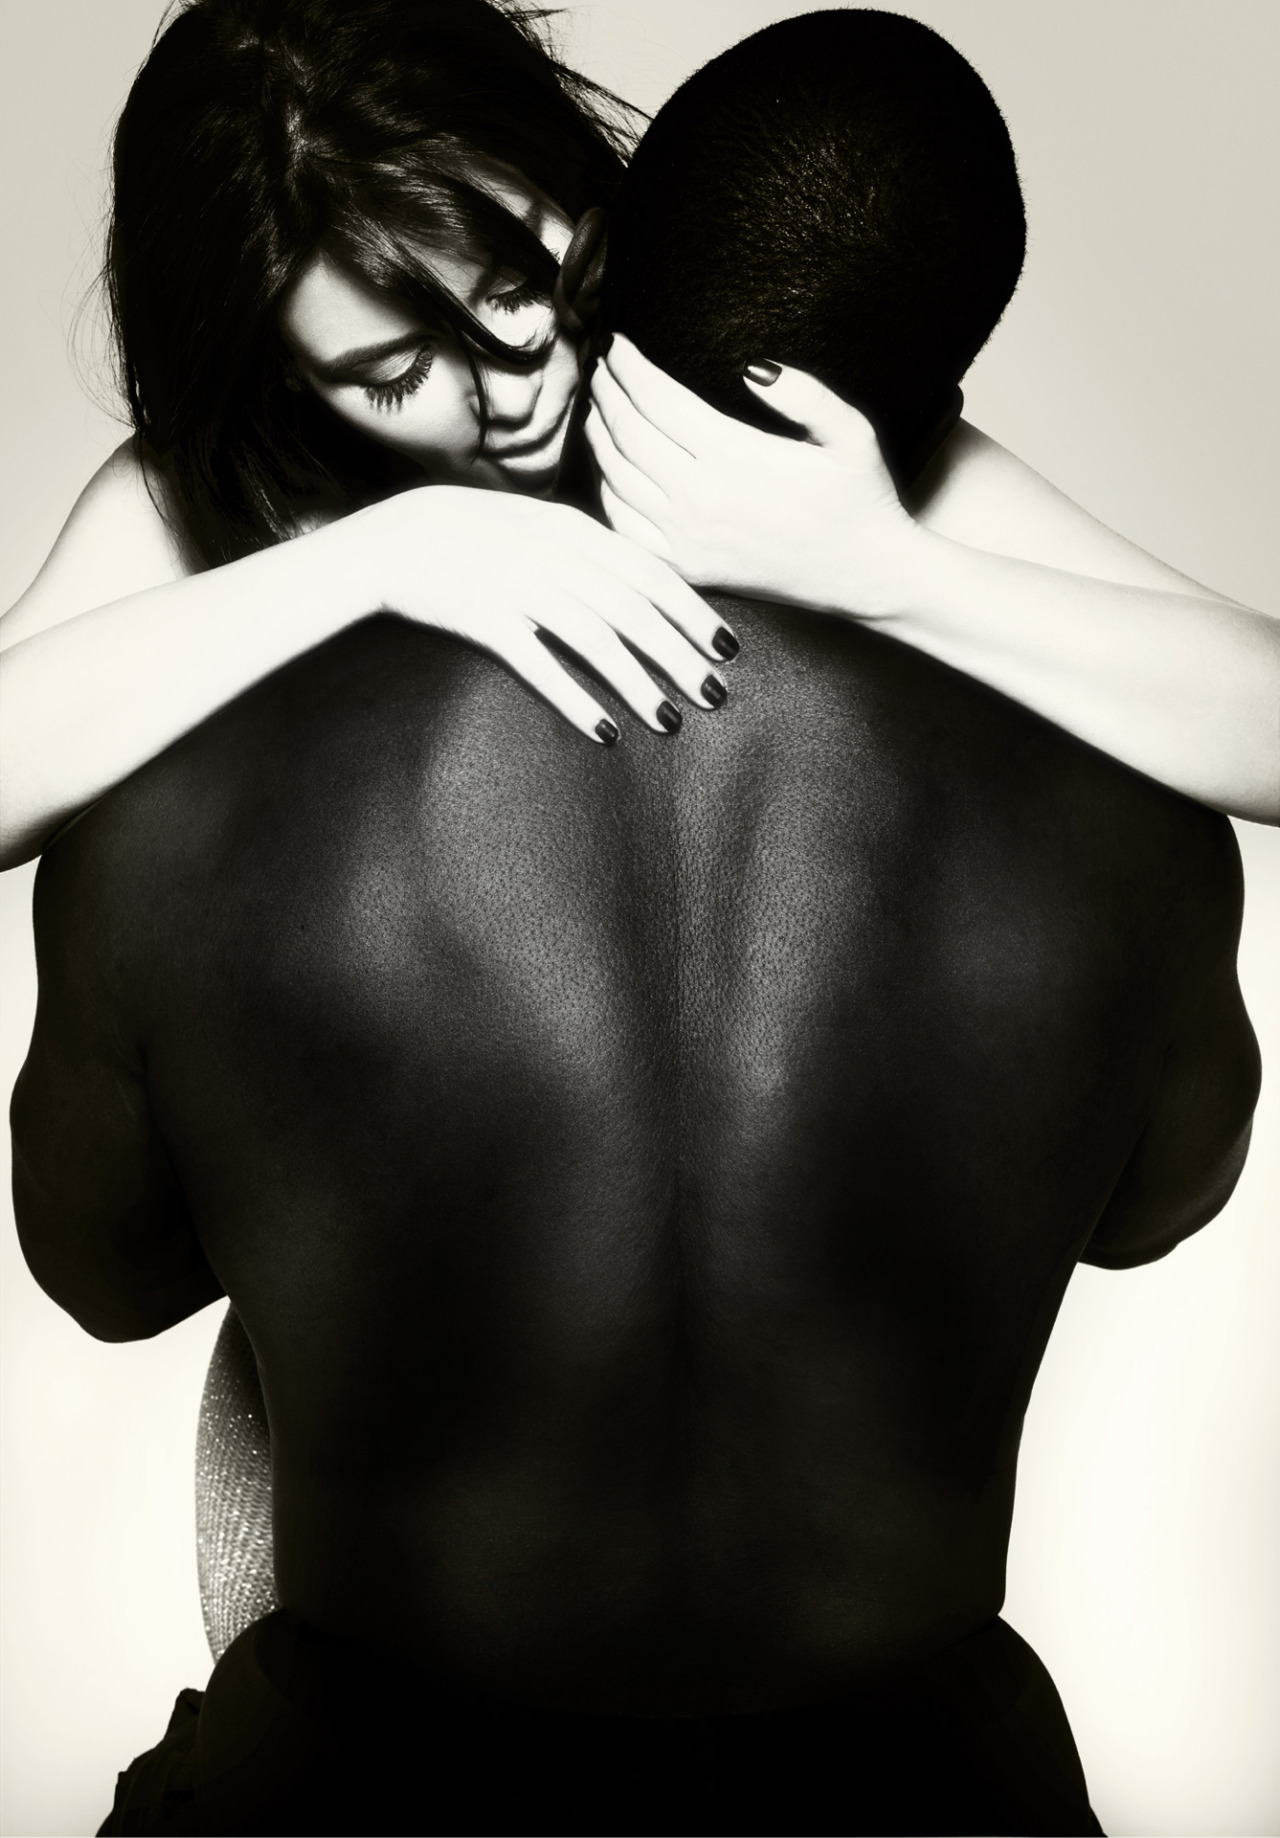 graycup: mightseehell: Kim Kardashian and Kanye West for L’Officiel Homme magazine by Nick Knight omg this is actually beautiful 